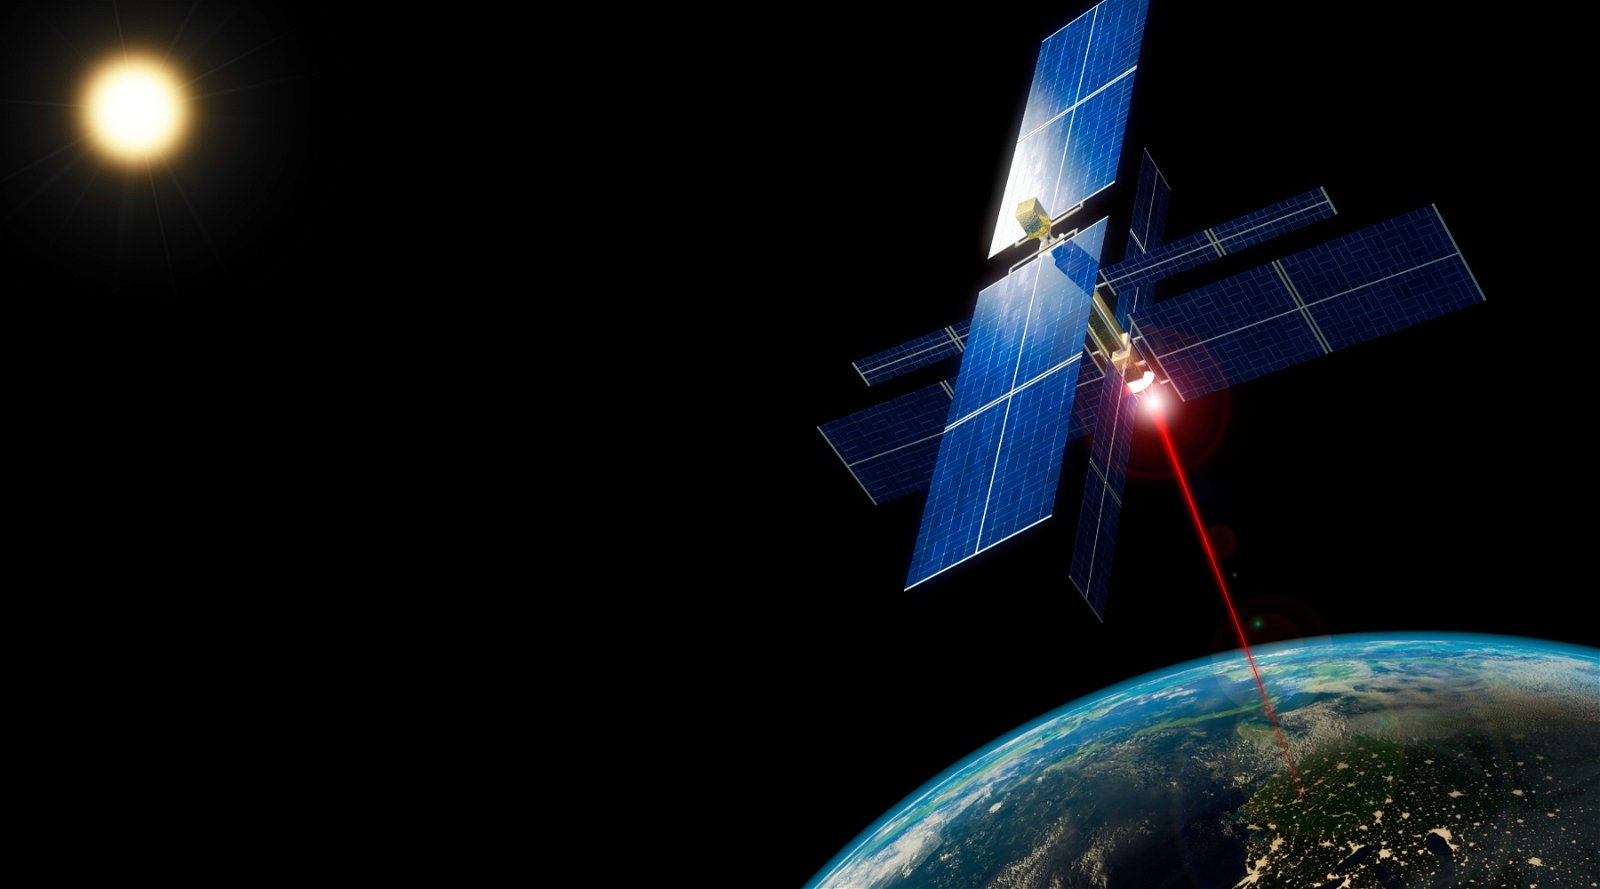 Japan wants to generate solar energy in space and return it